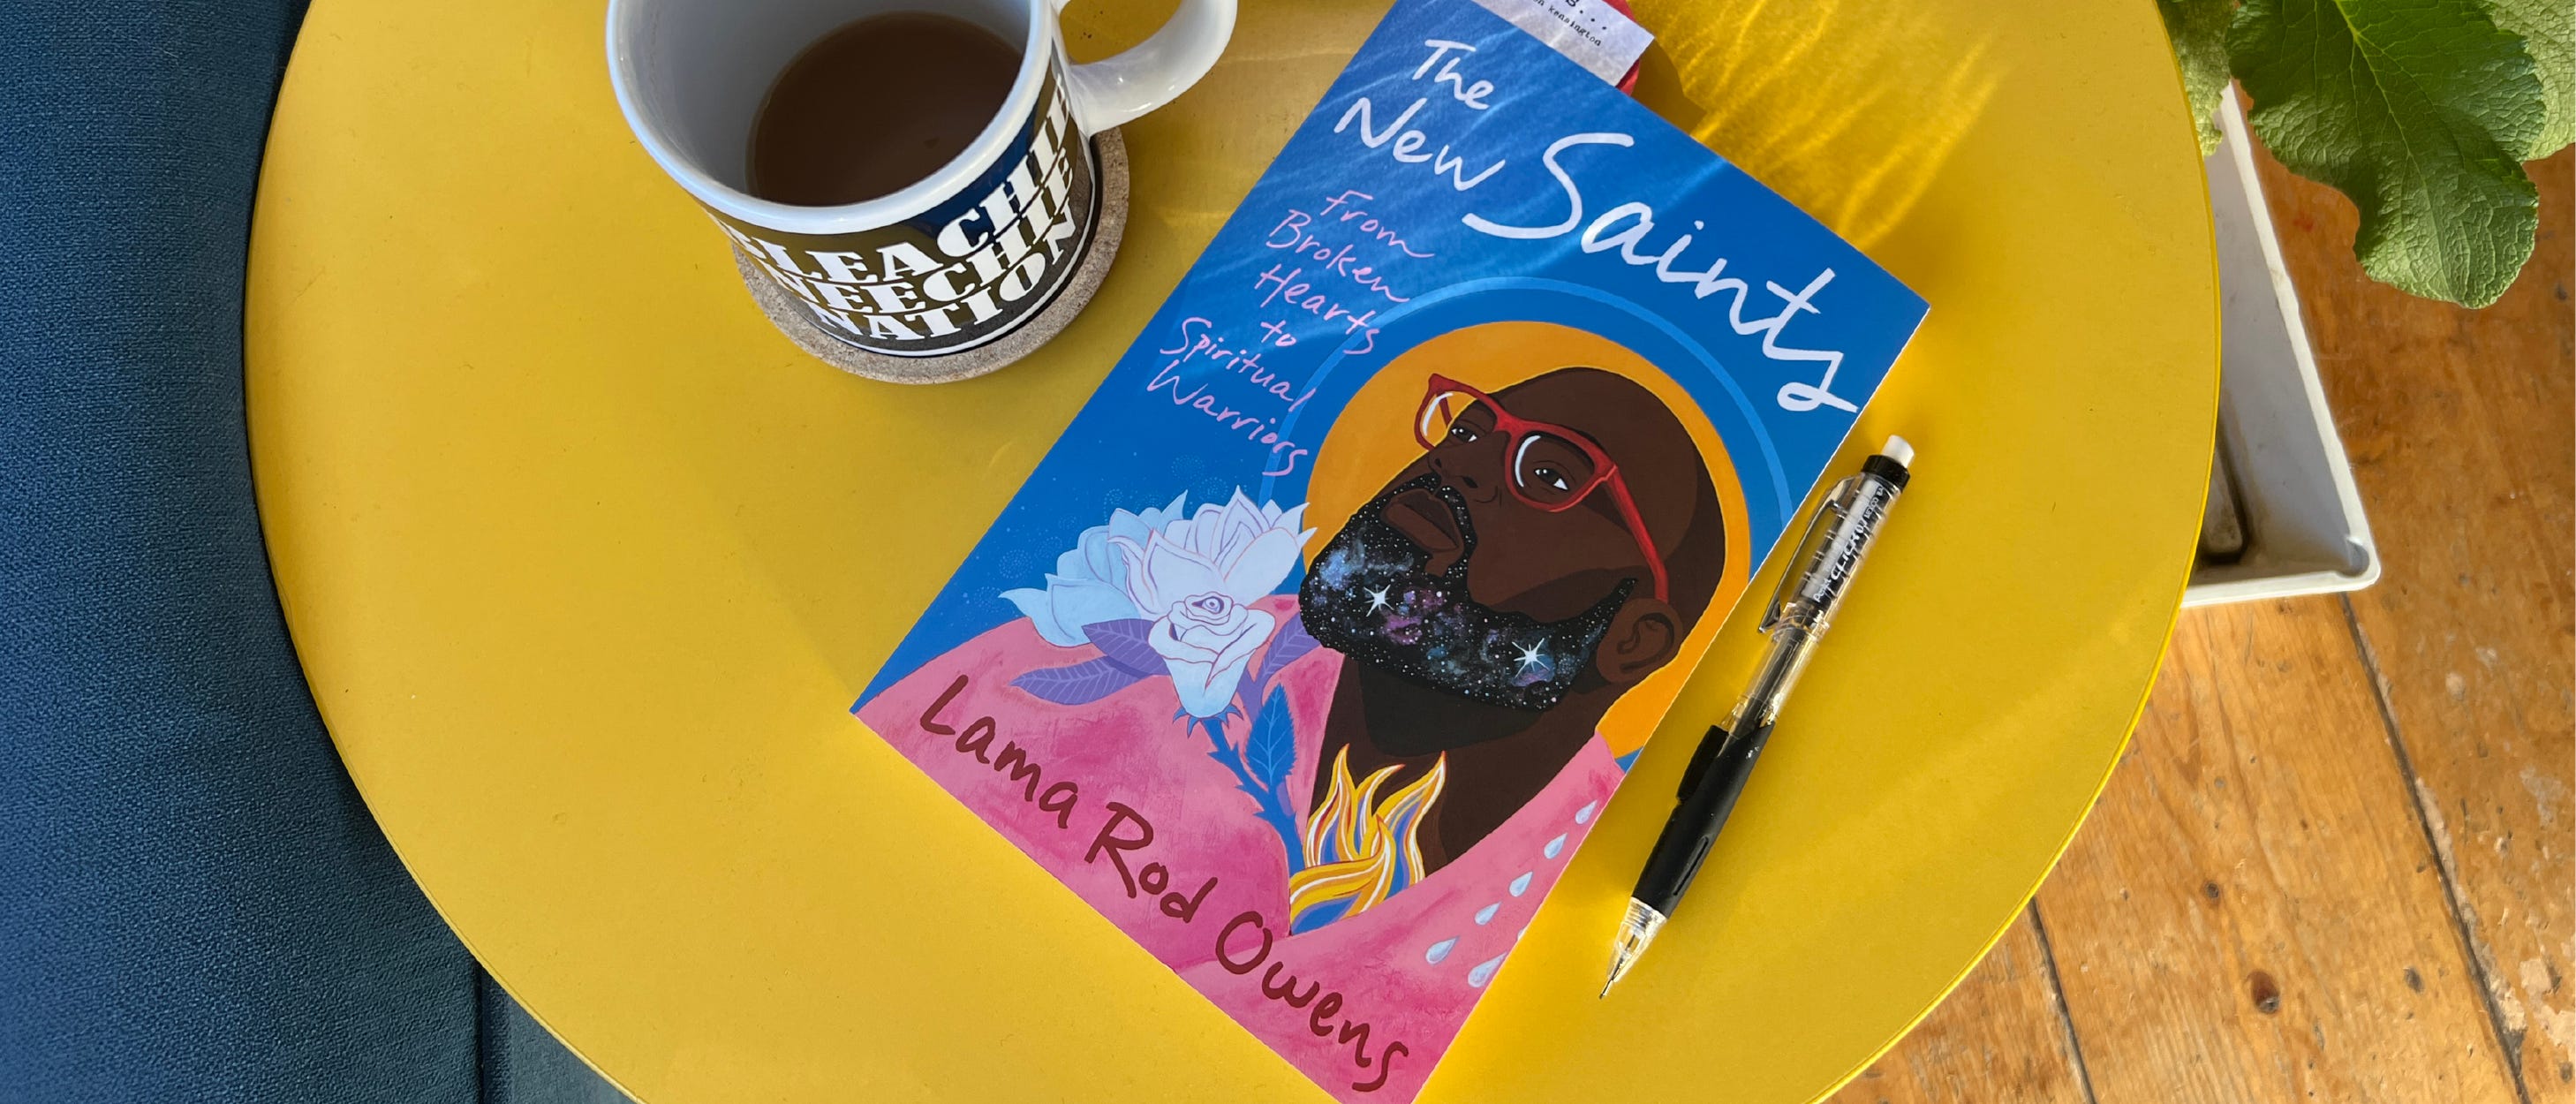 Photo of the book The New Saints sitting on a small round yellow side table. A mechanical pencil is laying to the right of the book and a mug of tea sits to the left. 